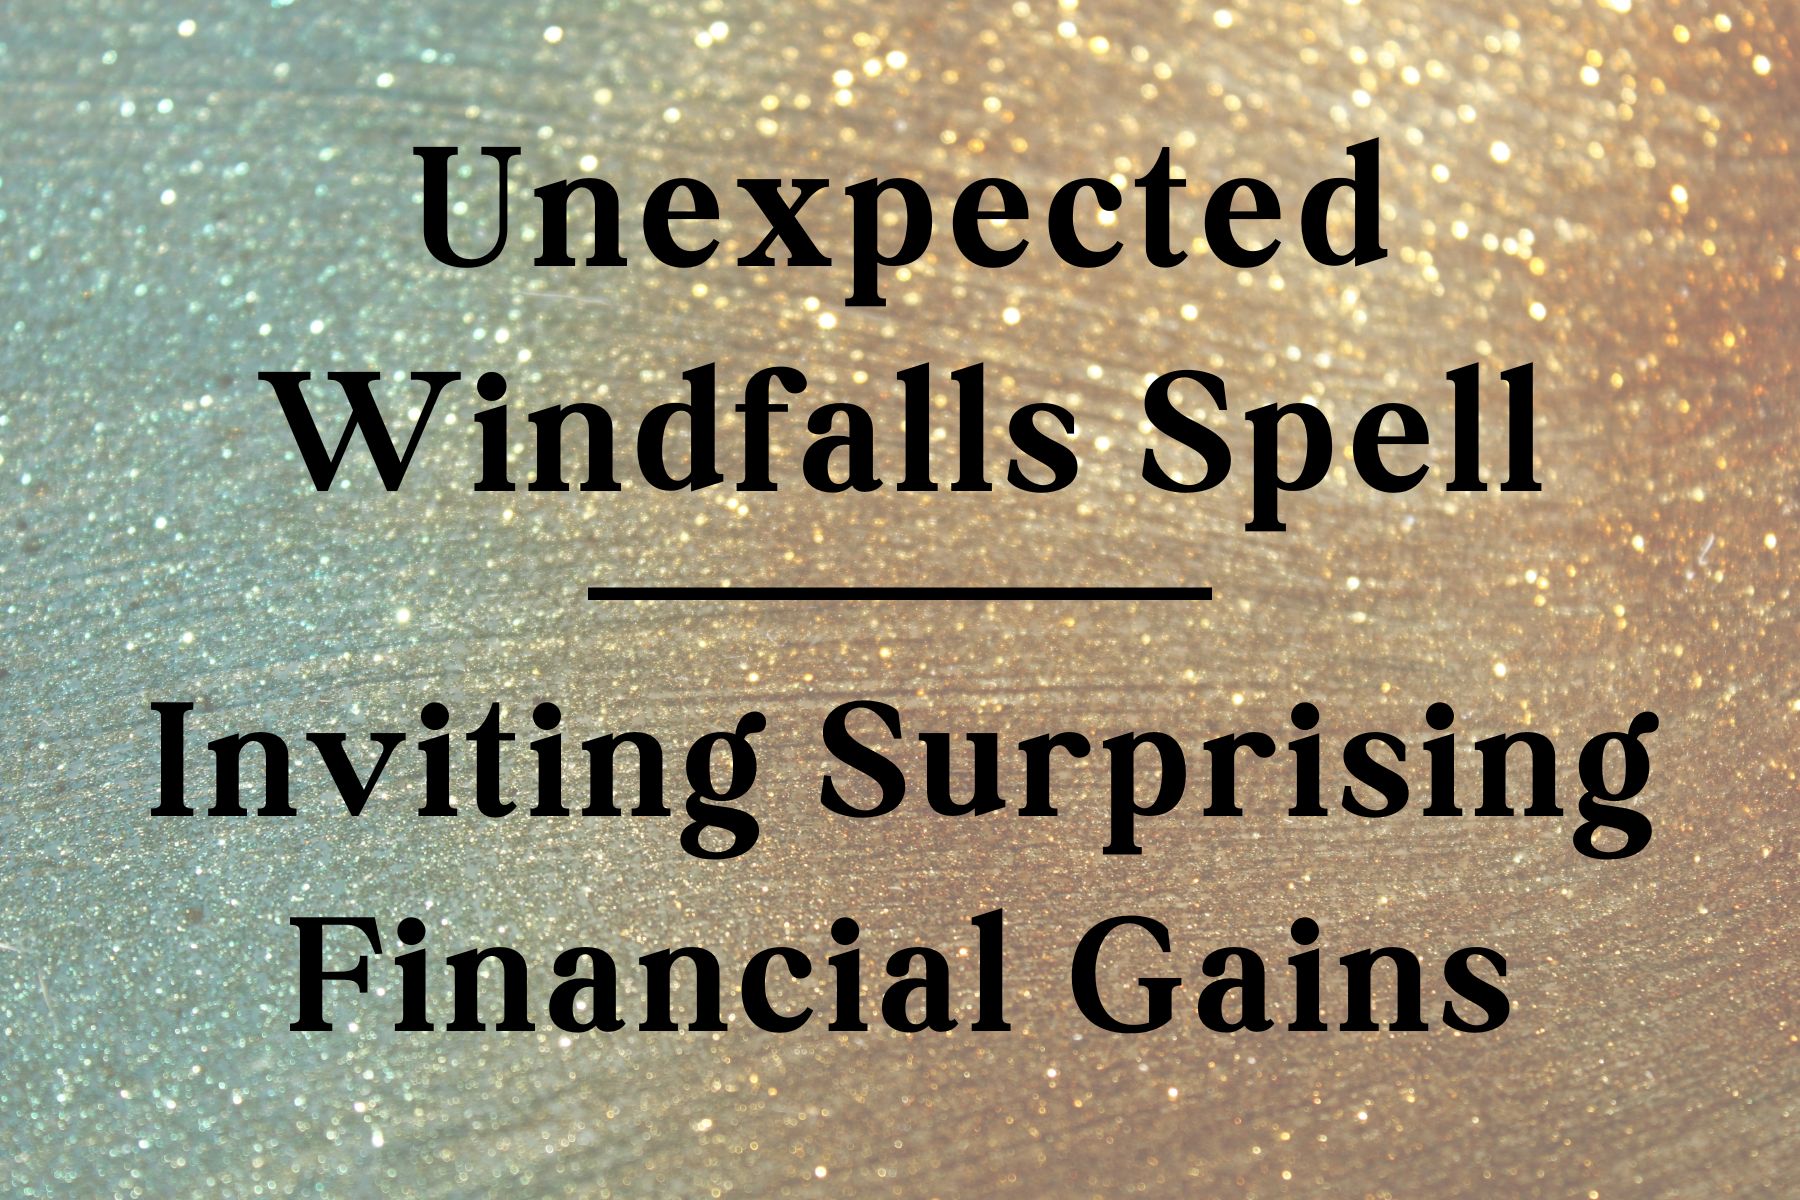 Unexpected Windfalls Spell: Inviting Surprising Financial Gains